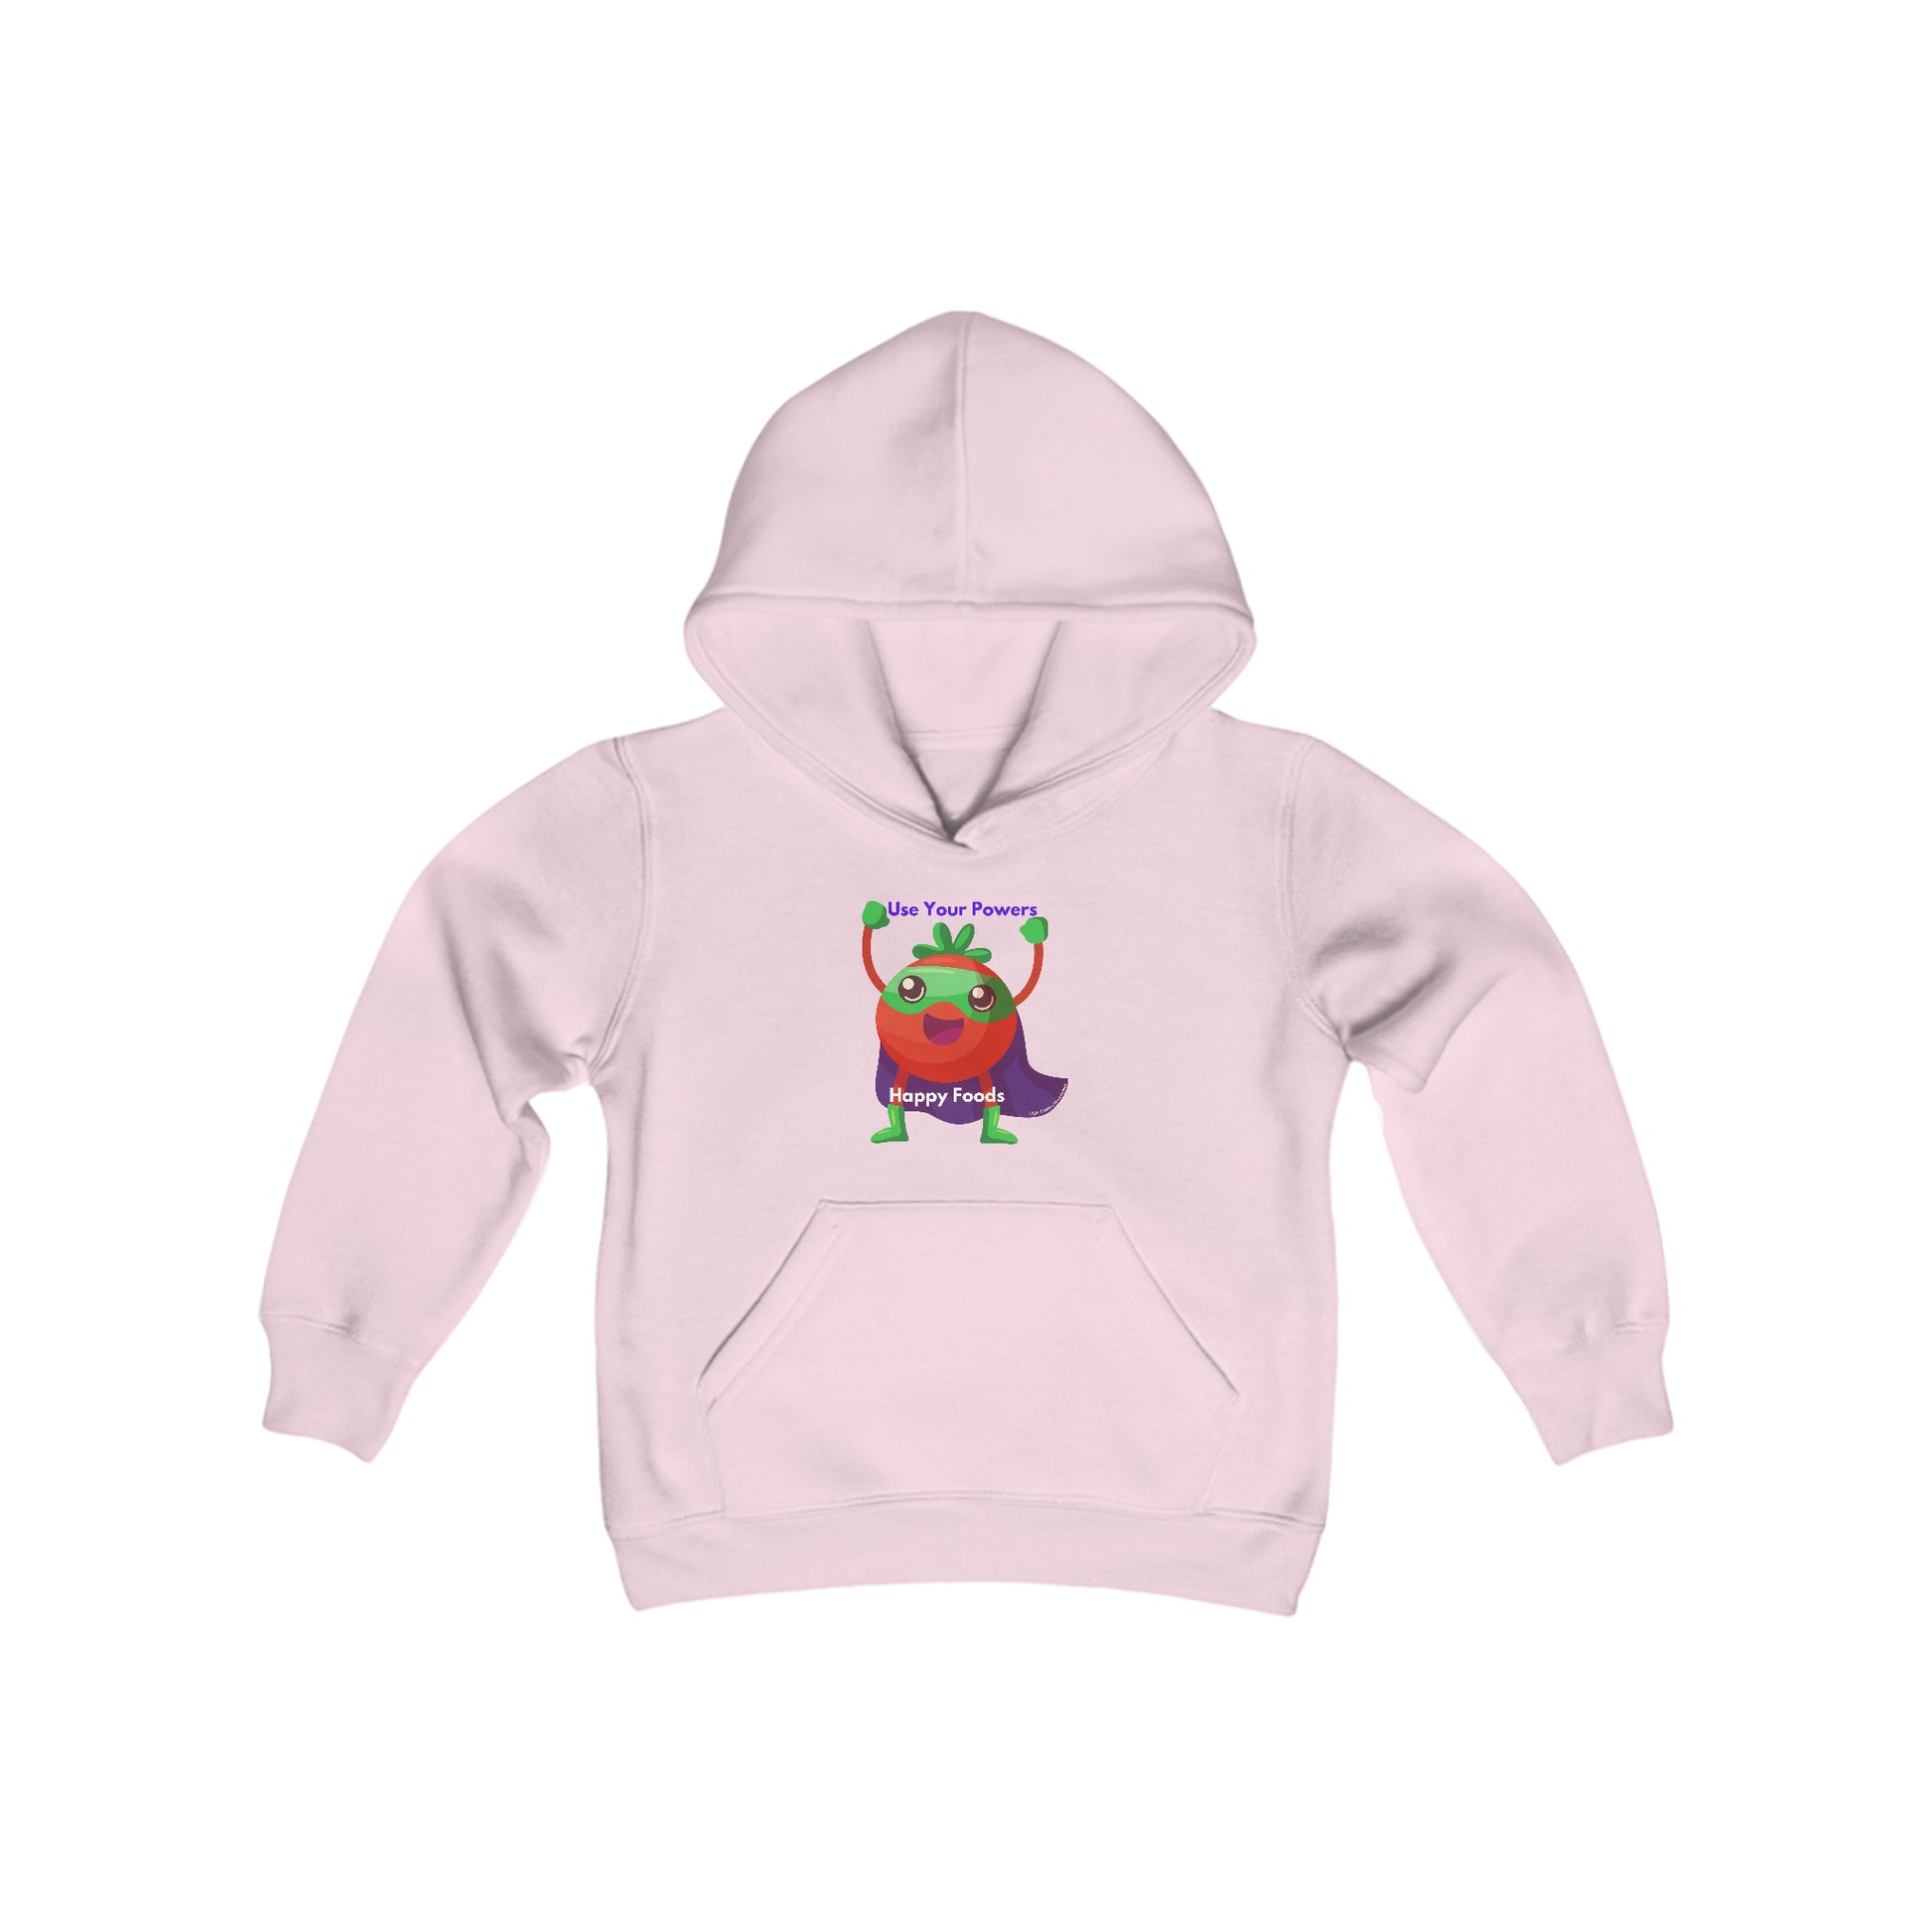 Youth hoodie featuring a cartoon tomato superhero design on pink fabric. Kangaroo pocket, twill-taped neck, and soft fleece blend for comfort. Ideal for vibrant printing.